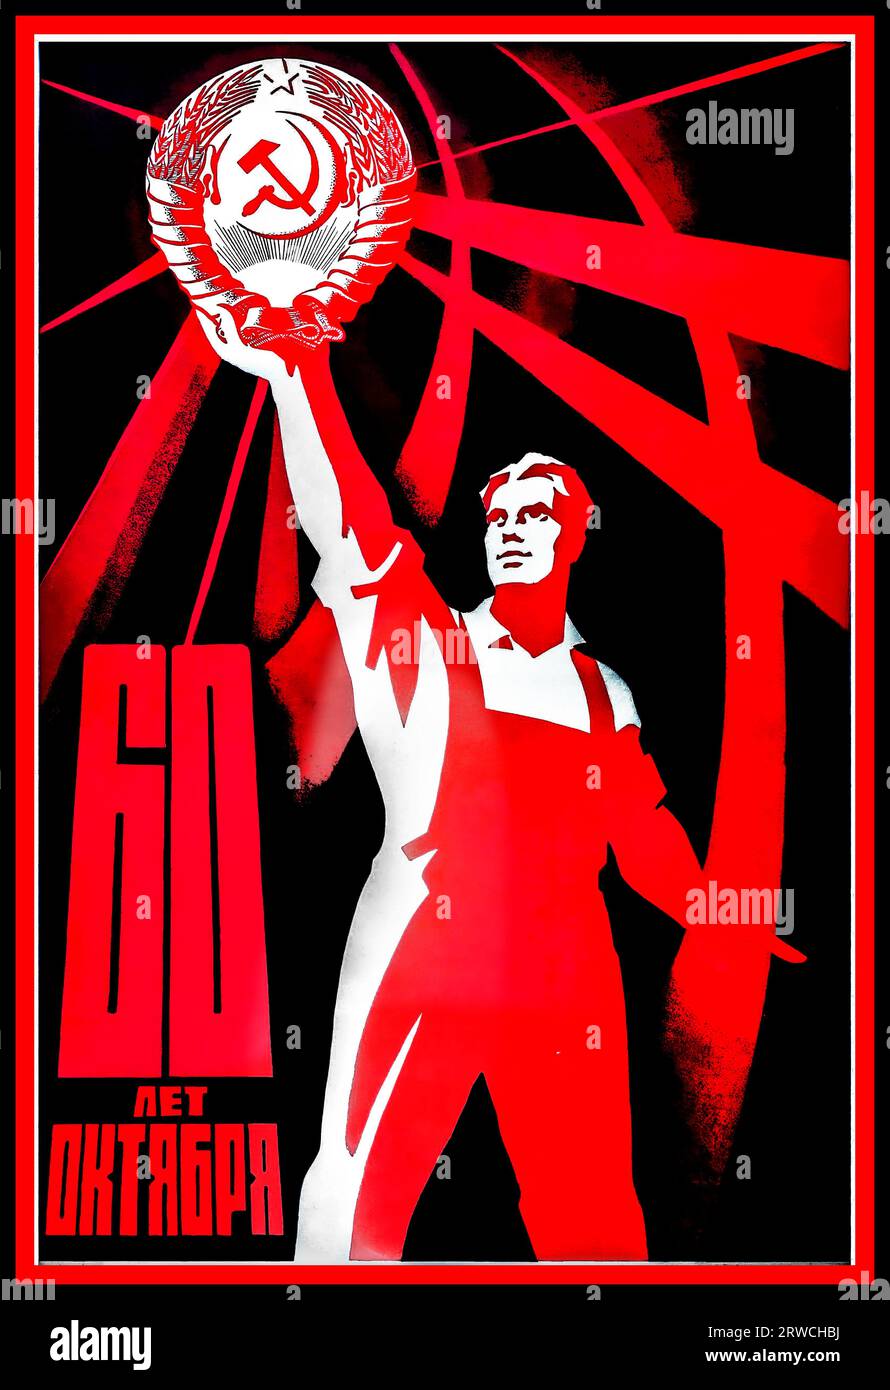 Soviet propaganda poster titled 60 Let Oktyabrya / 60 Years of October - commemorating 60 years since the October Revolution. The design shows a USSR worker in overalls holding aloft the Communist emblem of a sickle and hammer inside a wreath of wheat topped by the five-point star. The background is dark red with curved red lines -  Russia, designer: V. Briskin, year of printing: 1977 Stock Photo